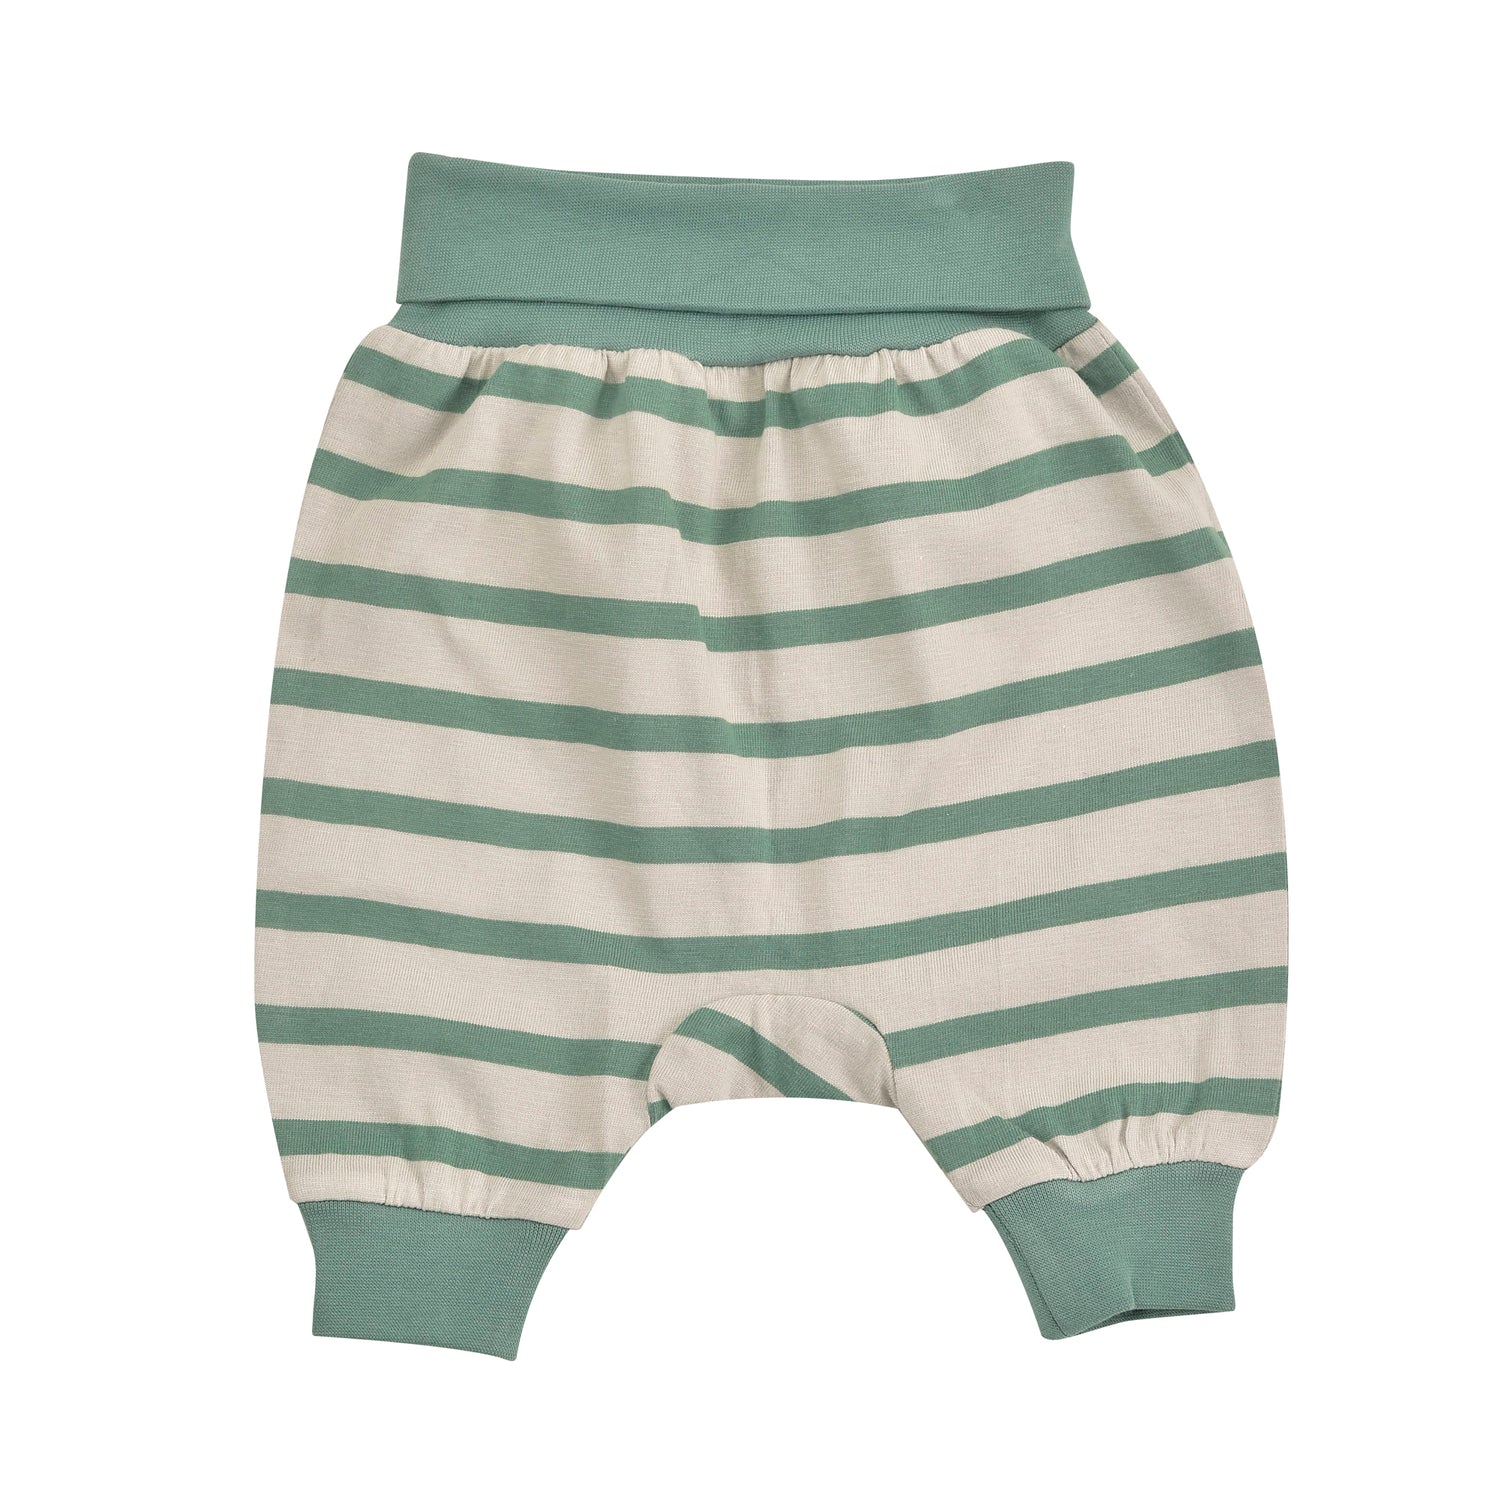 Breton stripe baby joggers in green and white